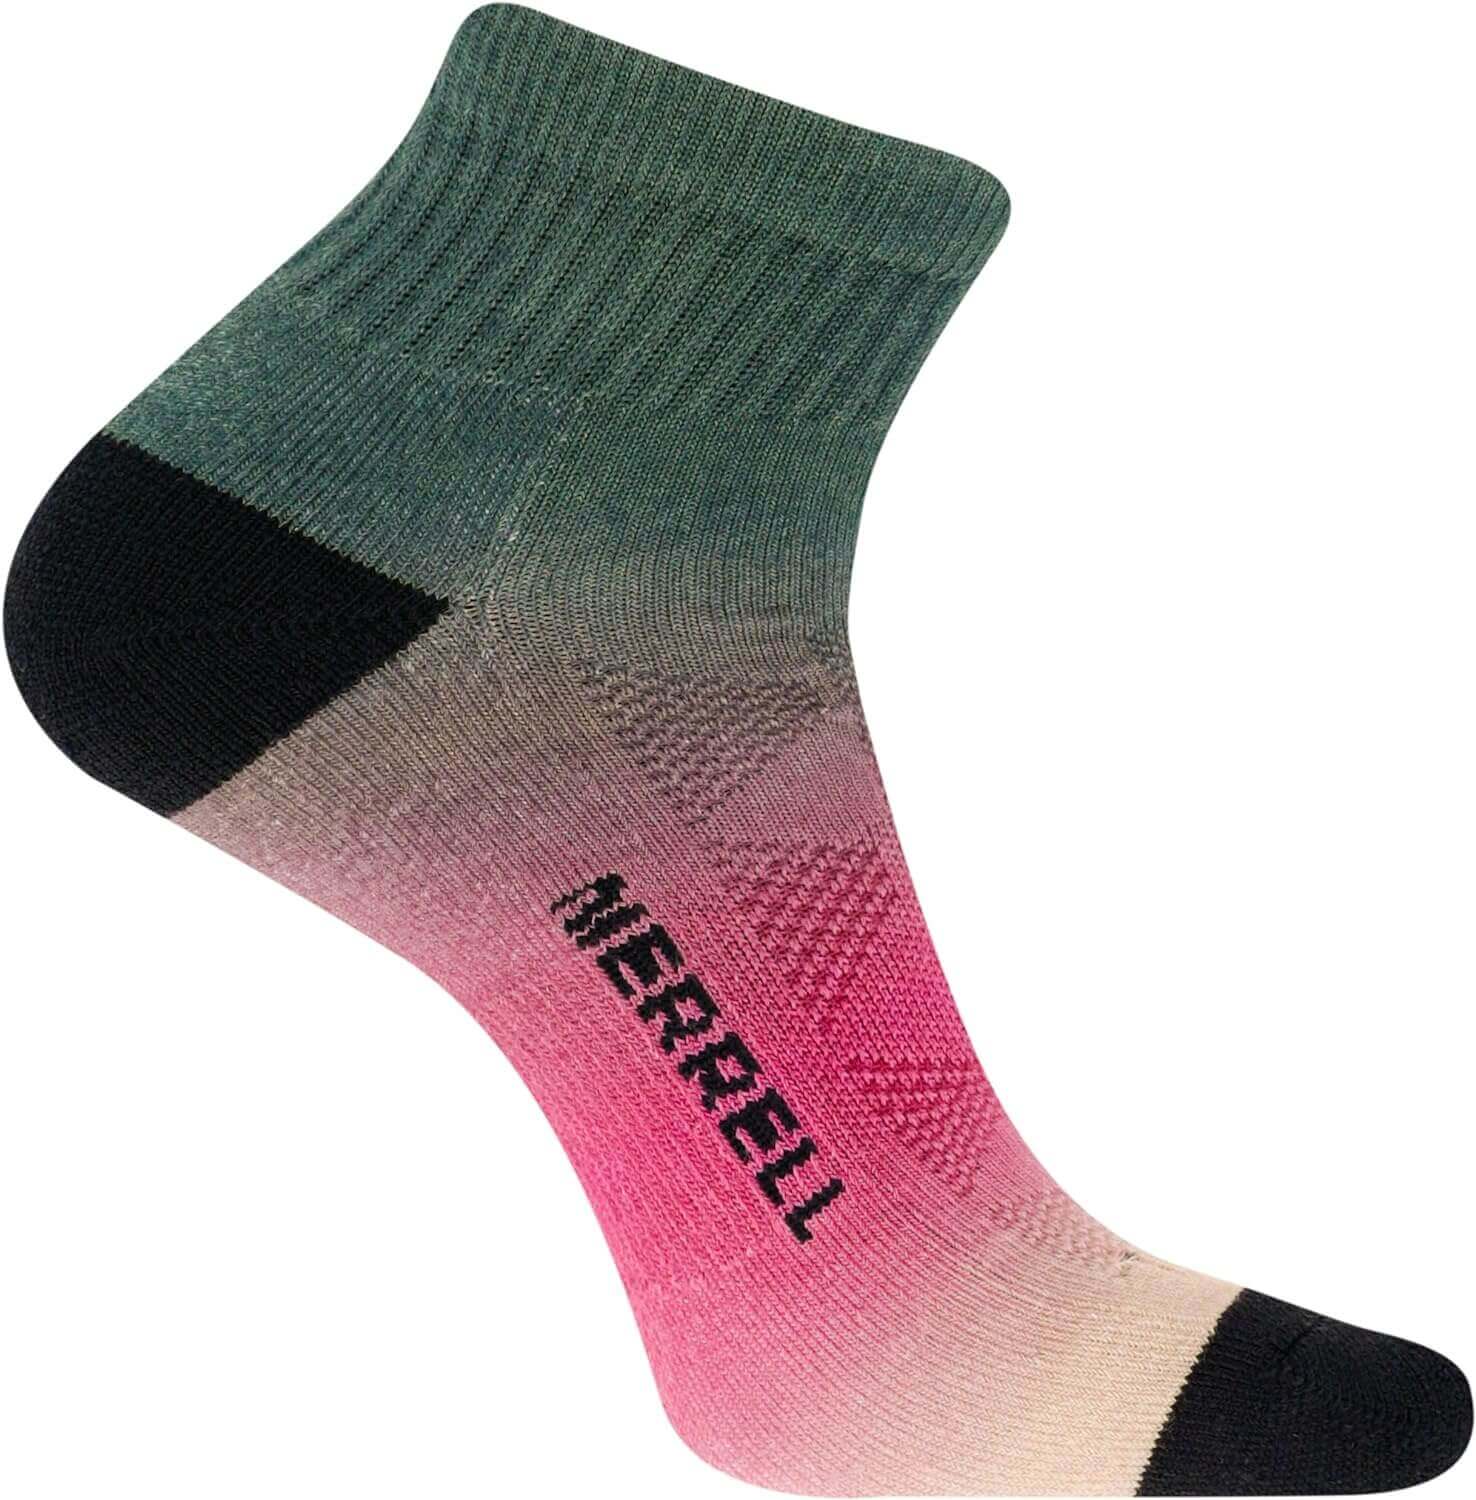 Shop The Latest >Merrell Men's and Women's Moab Hiking Mid Cushion Socks > *Only $16.74*> From The Top Brand > *Merrelll* > Shop Now and Get Free Shipping On Orders Over $45.00 >*Shop Earth Foot*